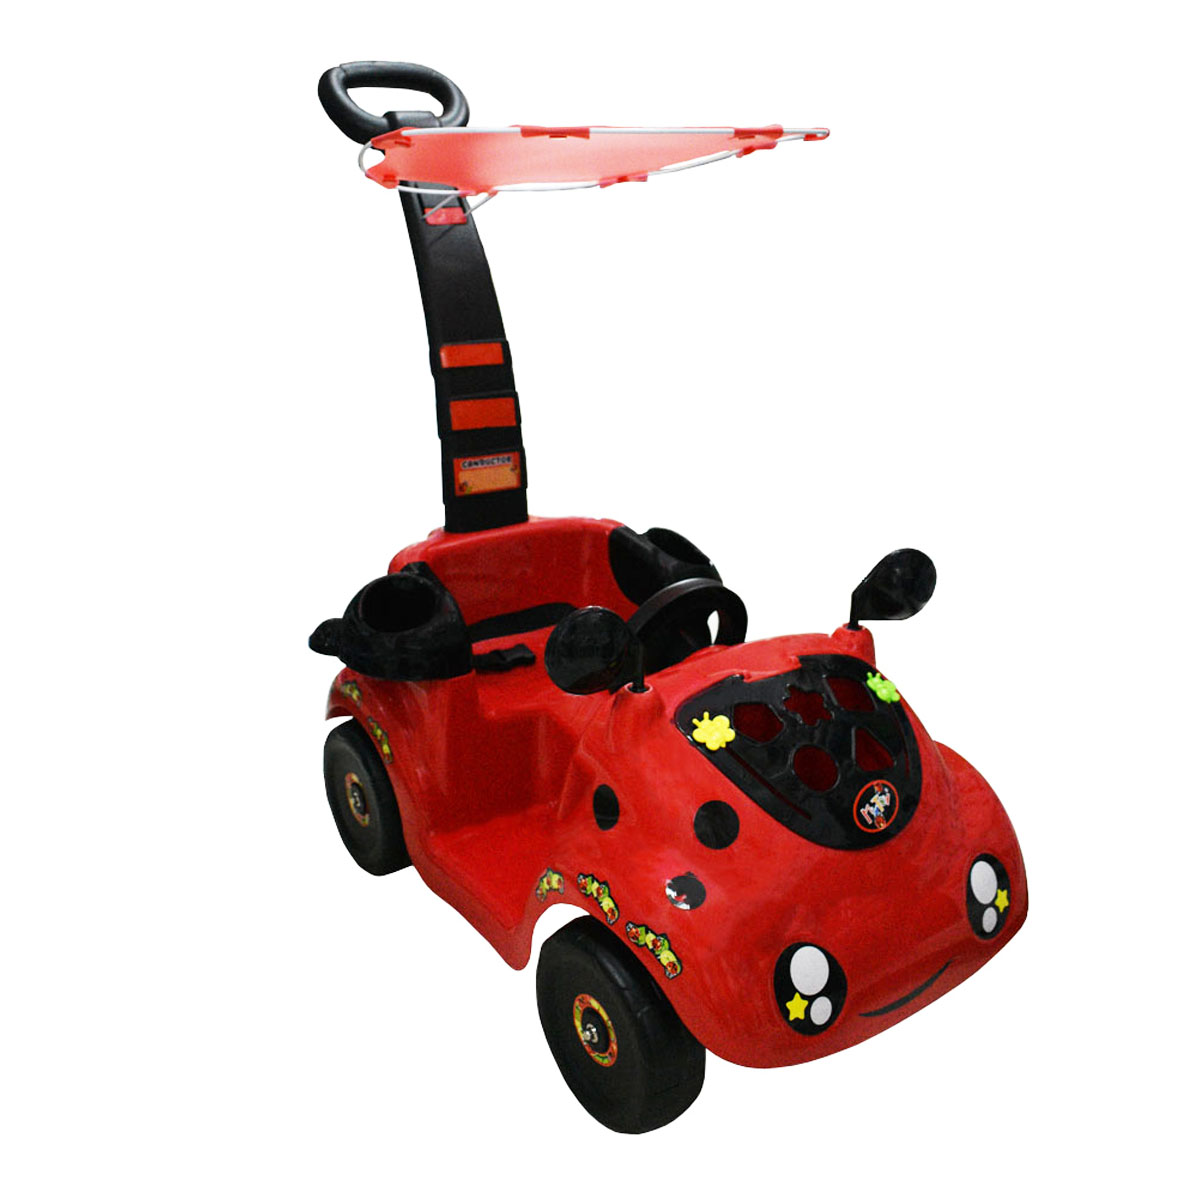 Juguete Carrito Montable Mytoy 705810rs Color Rojo Mini Car Buggy